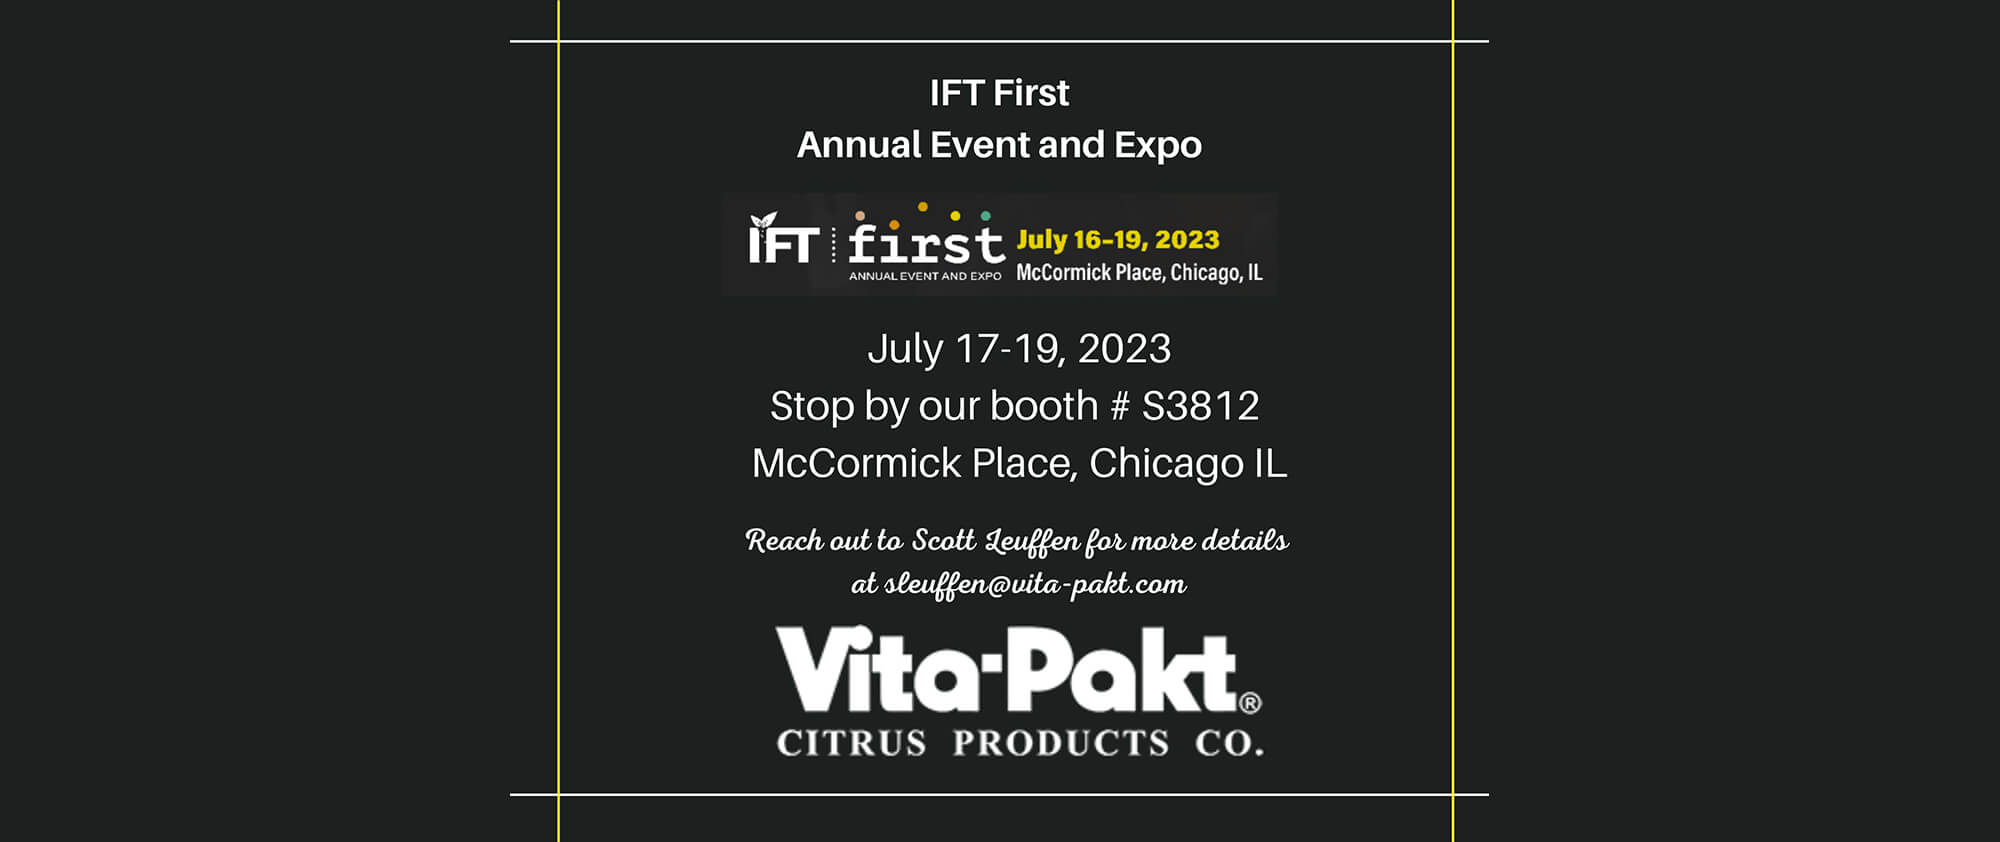 Chicago IFT Expo - July 17 - 19, 2023